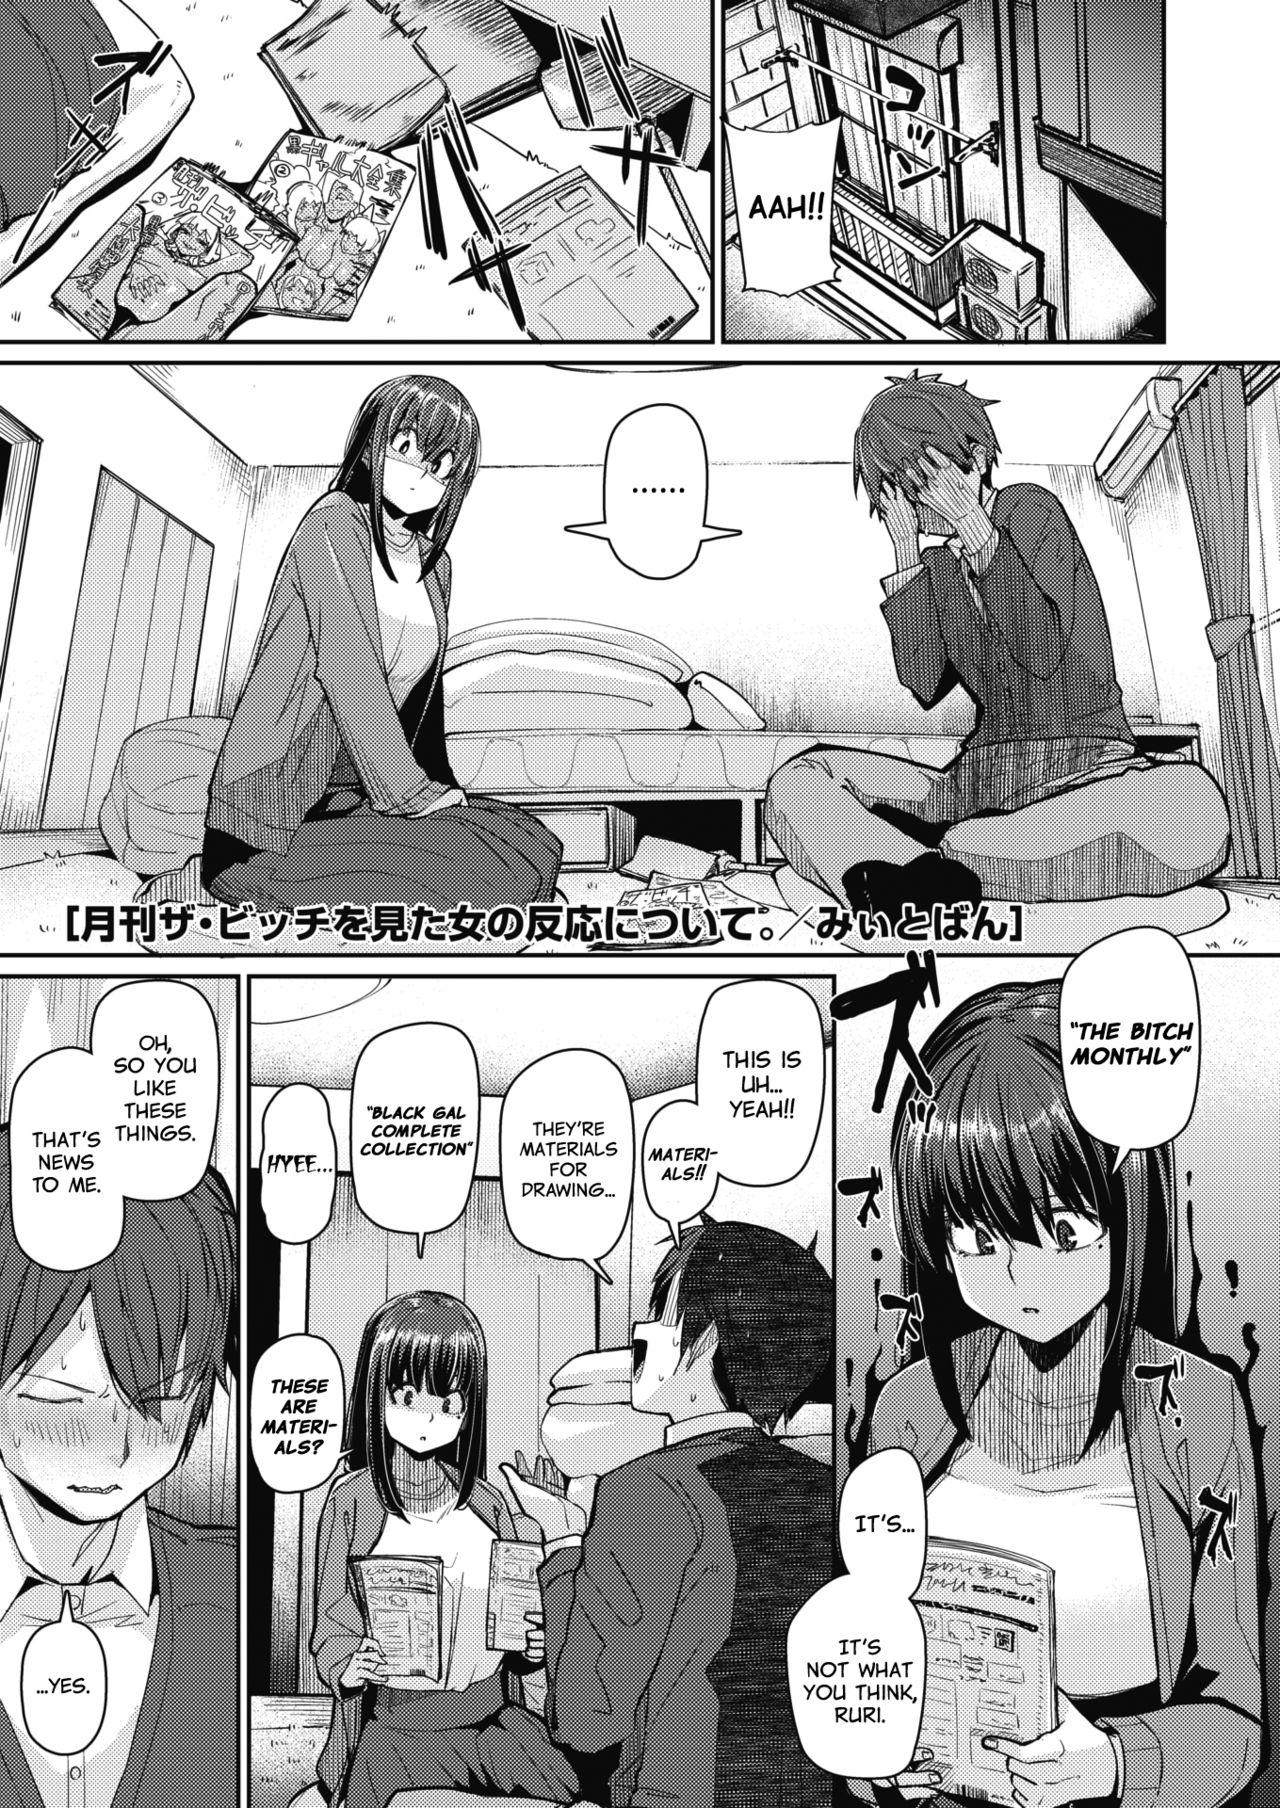 Big Cock Gekkan "Za Bicchi" wo Mita Onna no Hannou ni Tsuite | About the Reaction of the Girl Who Saw "The Bitch Monthly" Redhead - Page 1